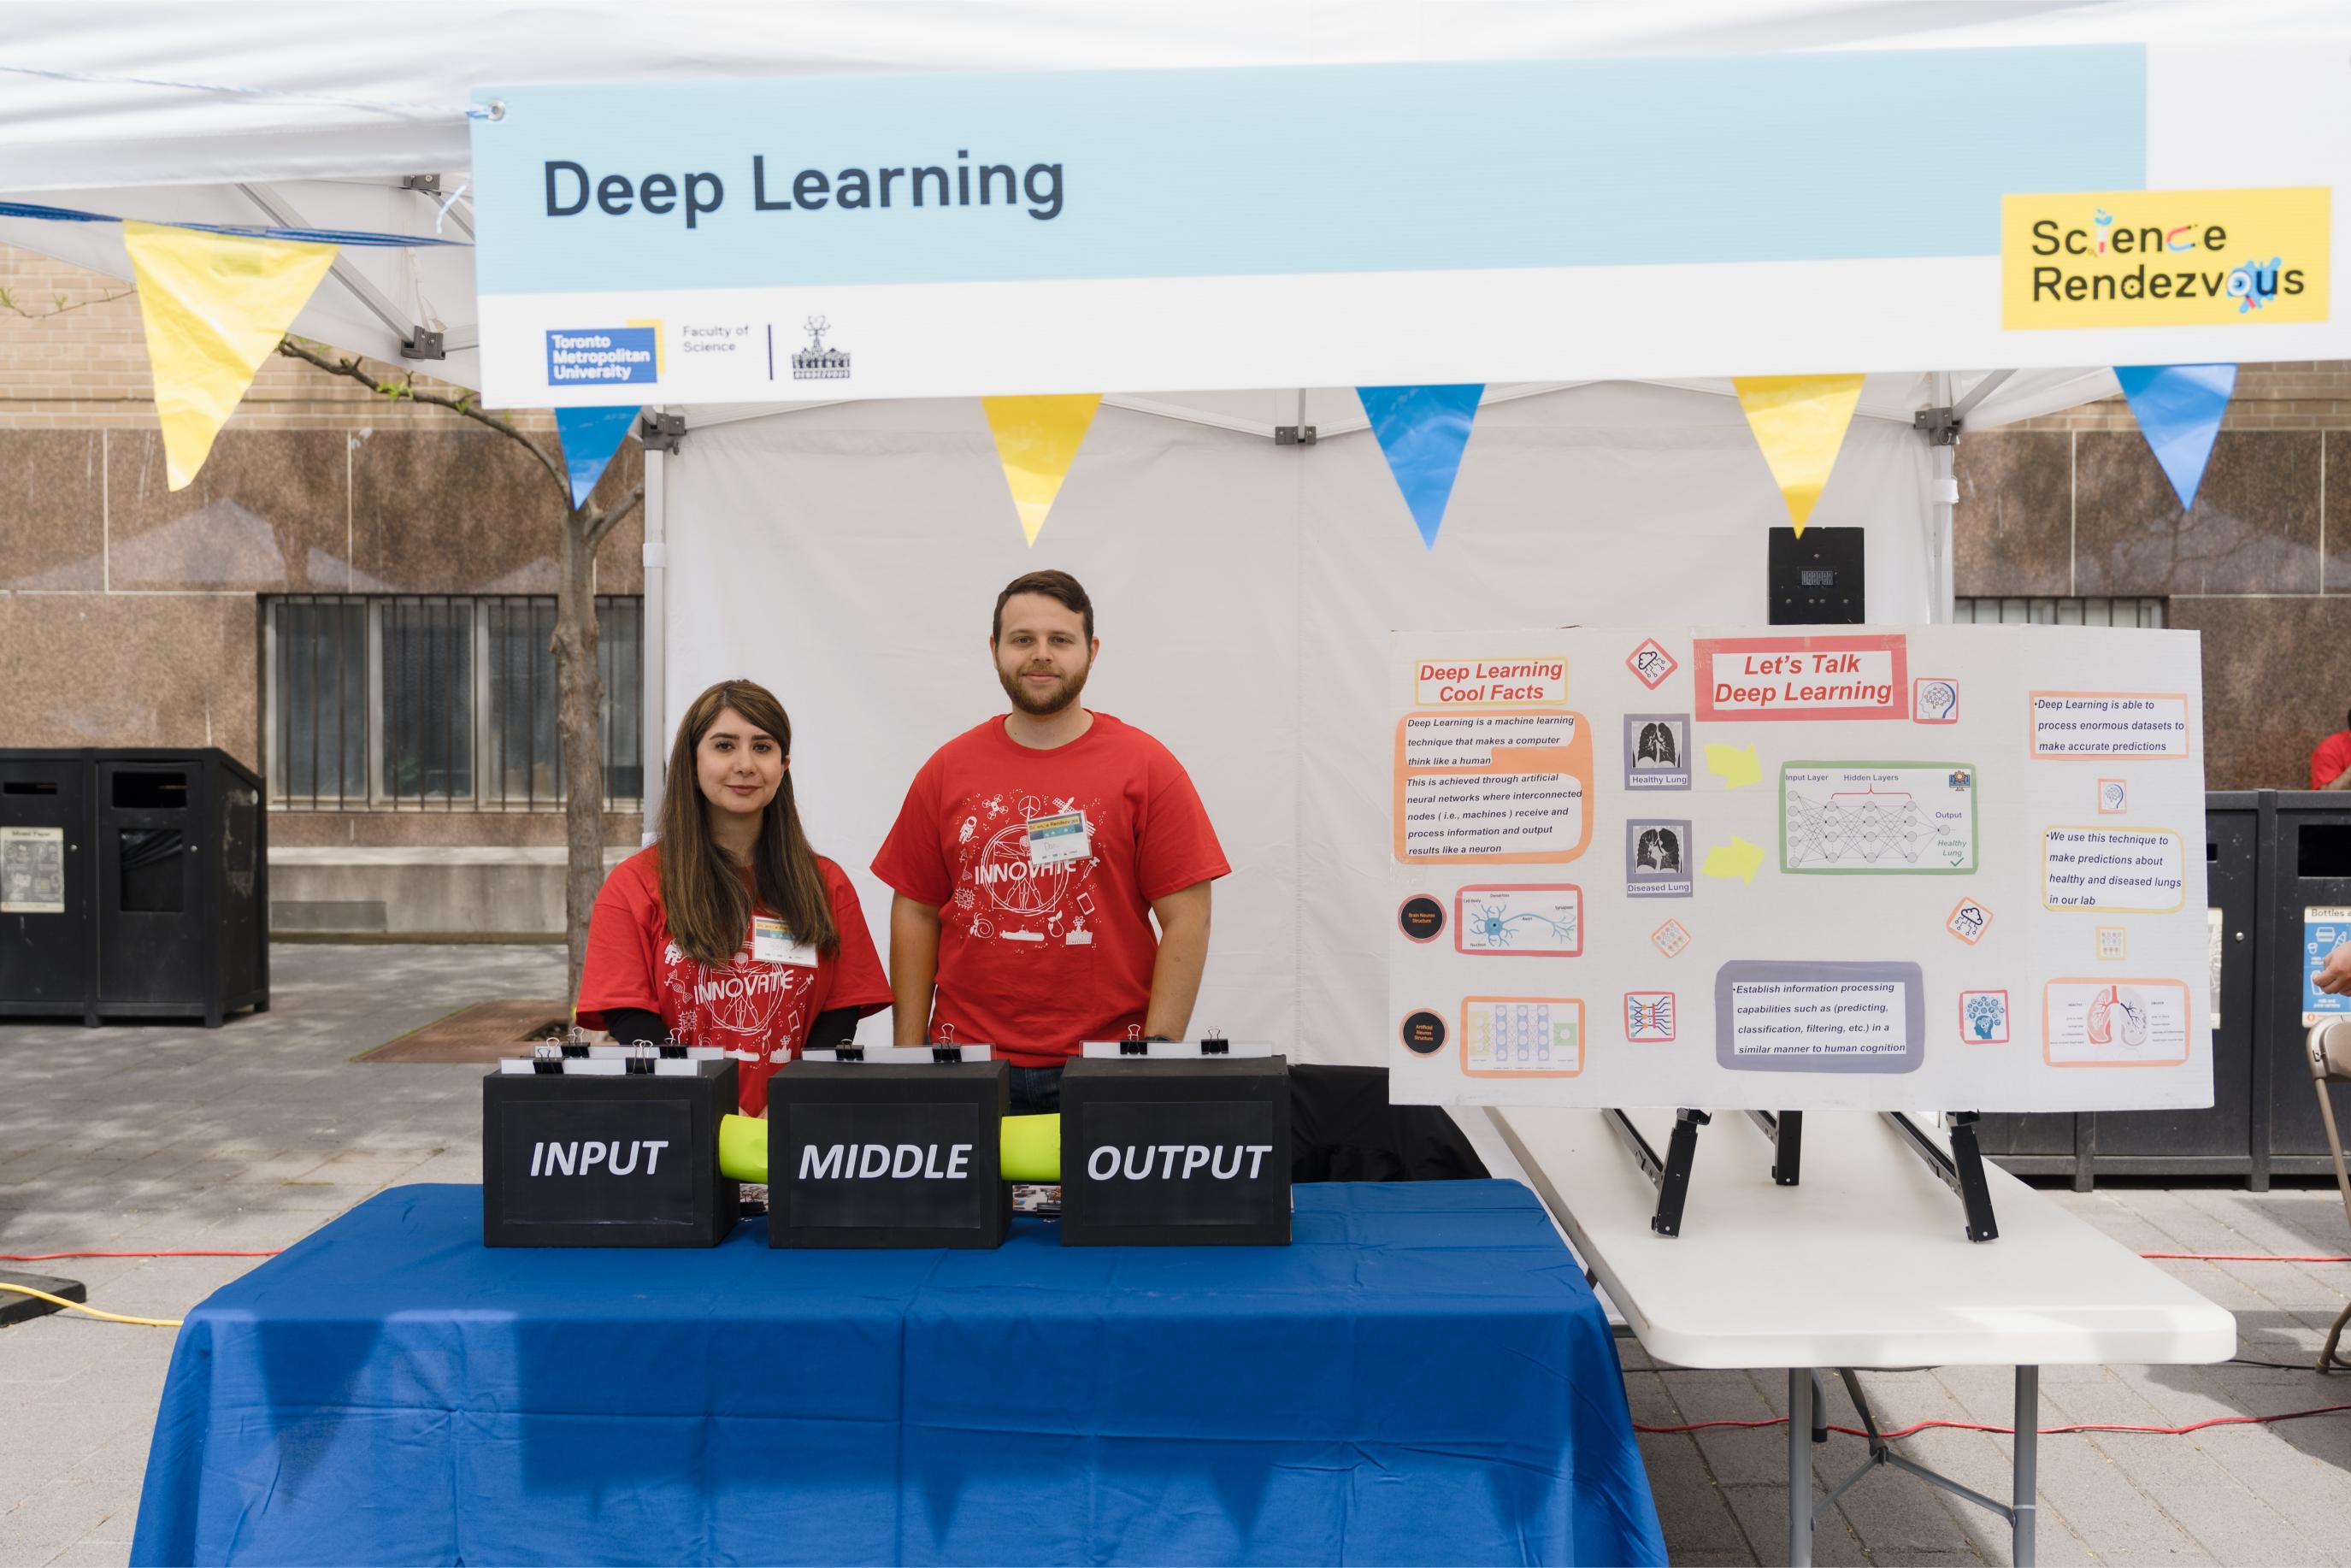 Two volunteers posing at the Deep Learning Booth.